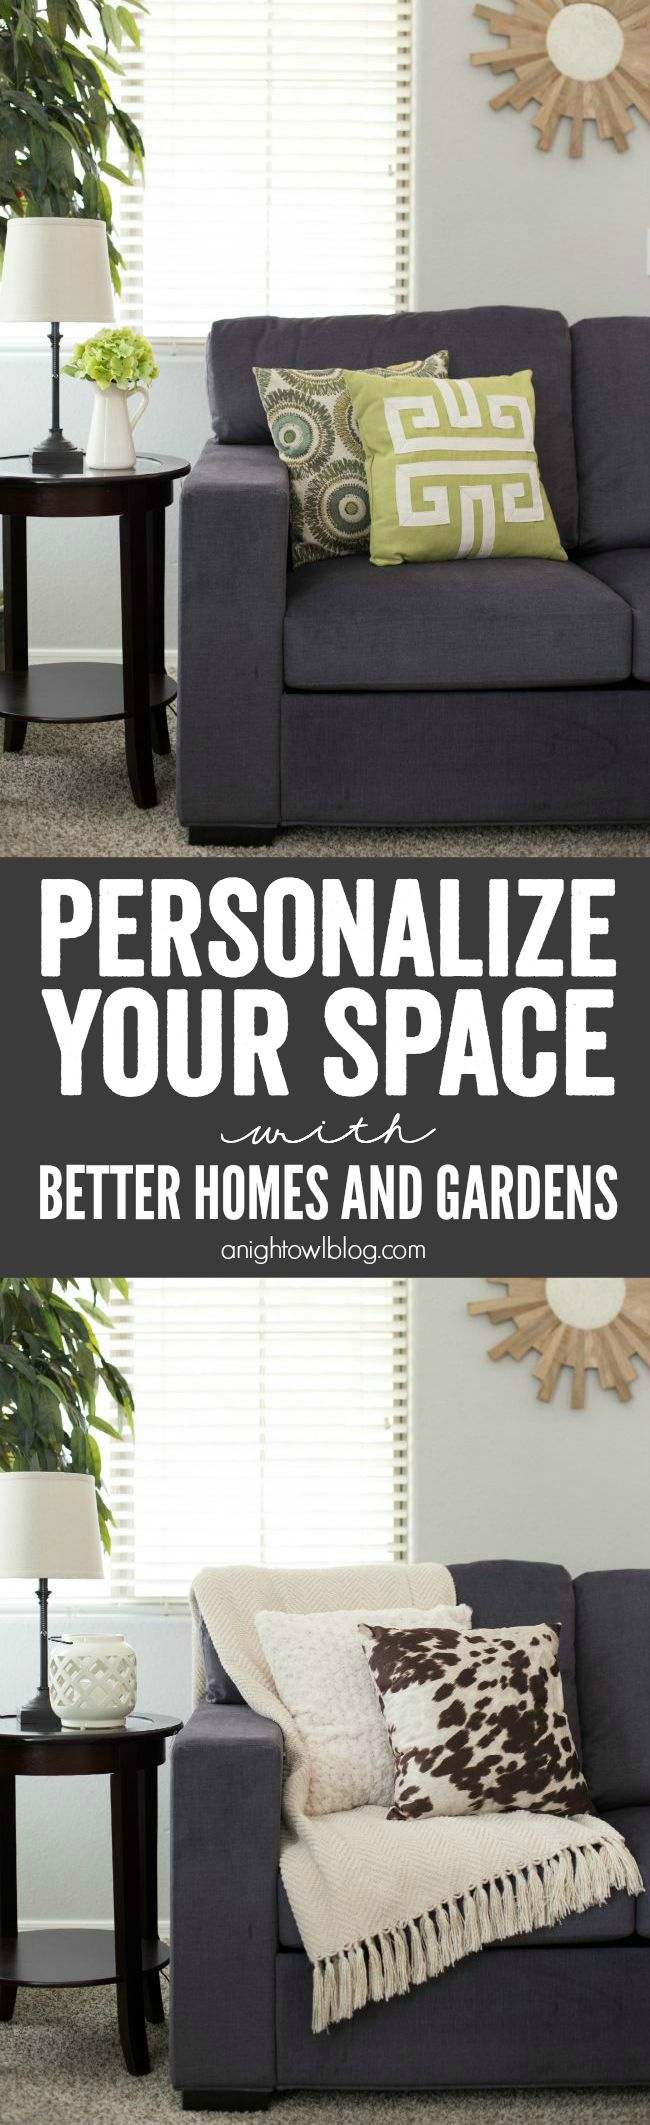 Personalize your space with Better Homes and Gardens products at Walmart!